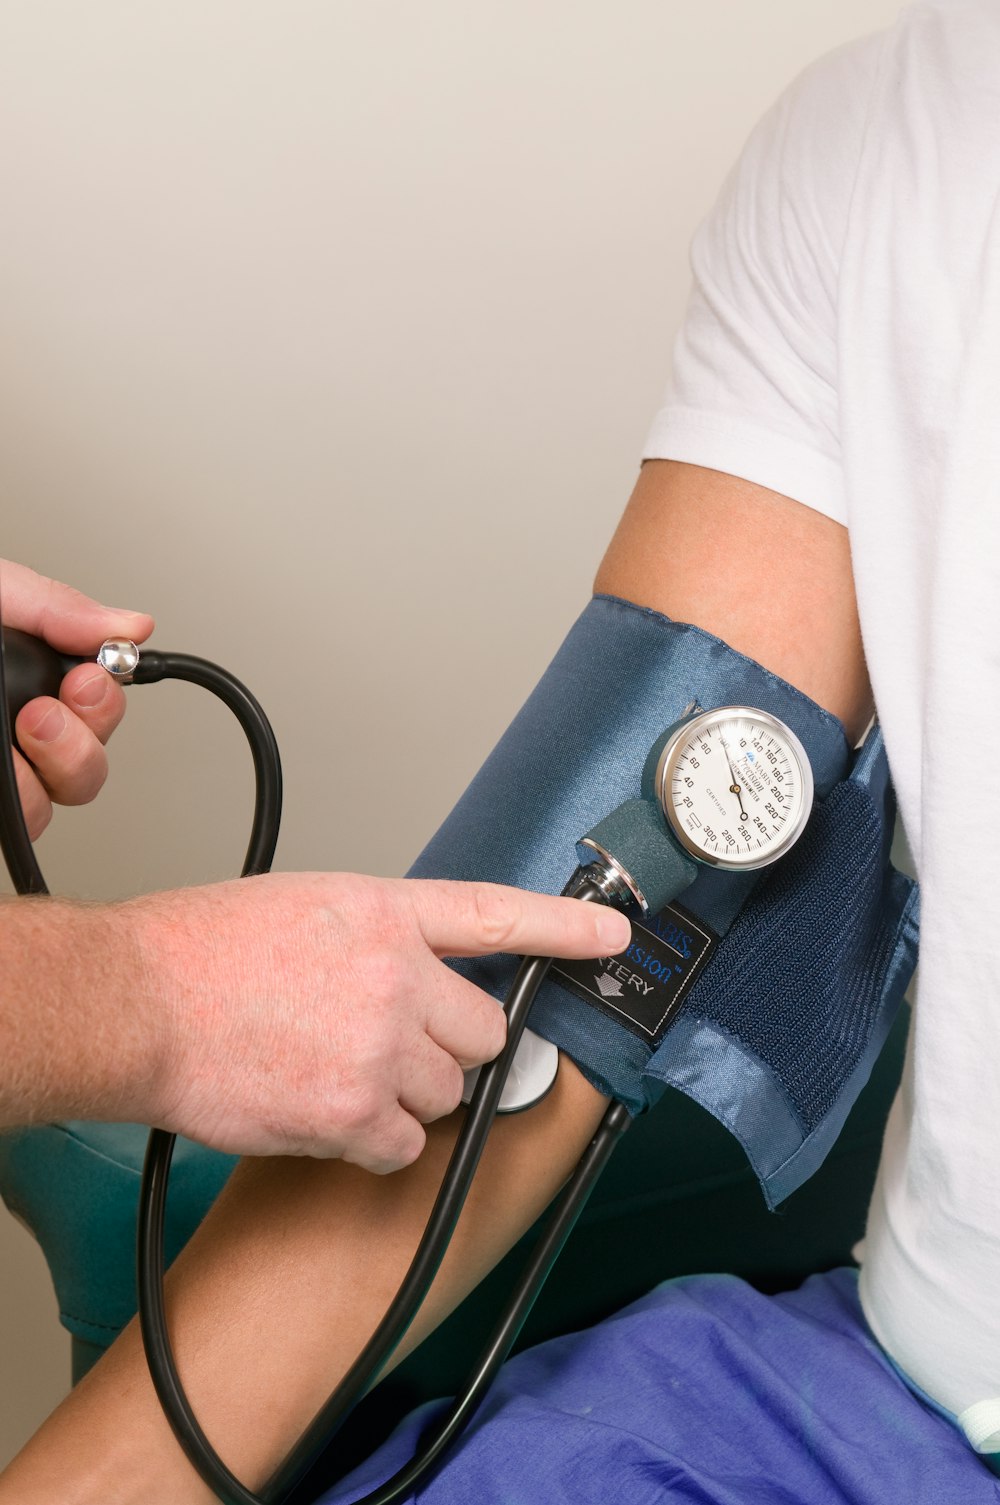 a doctor checking the blood pressure of a patient